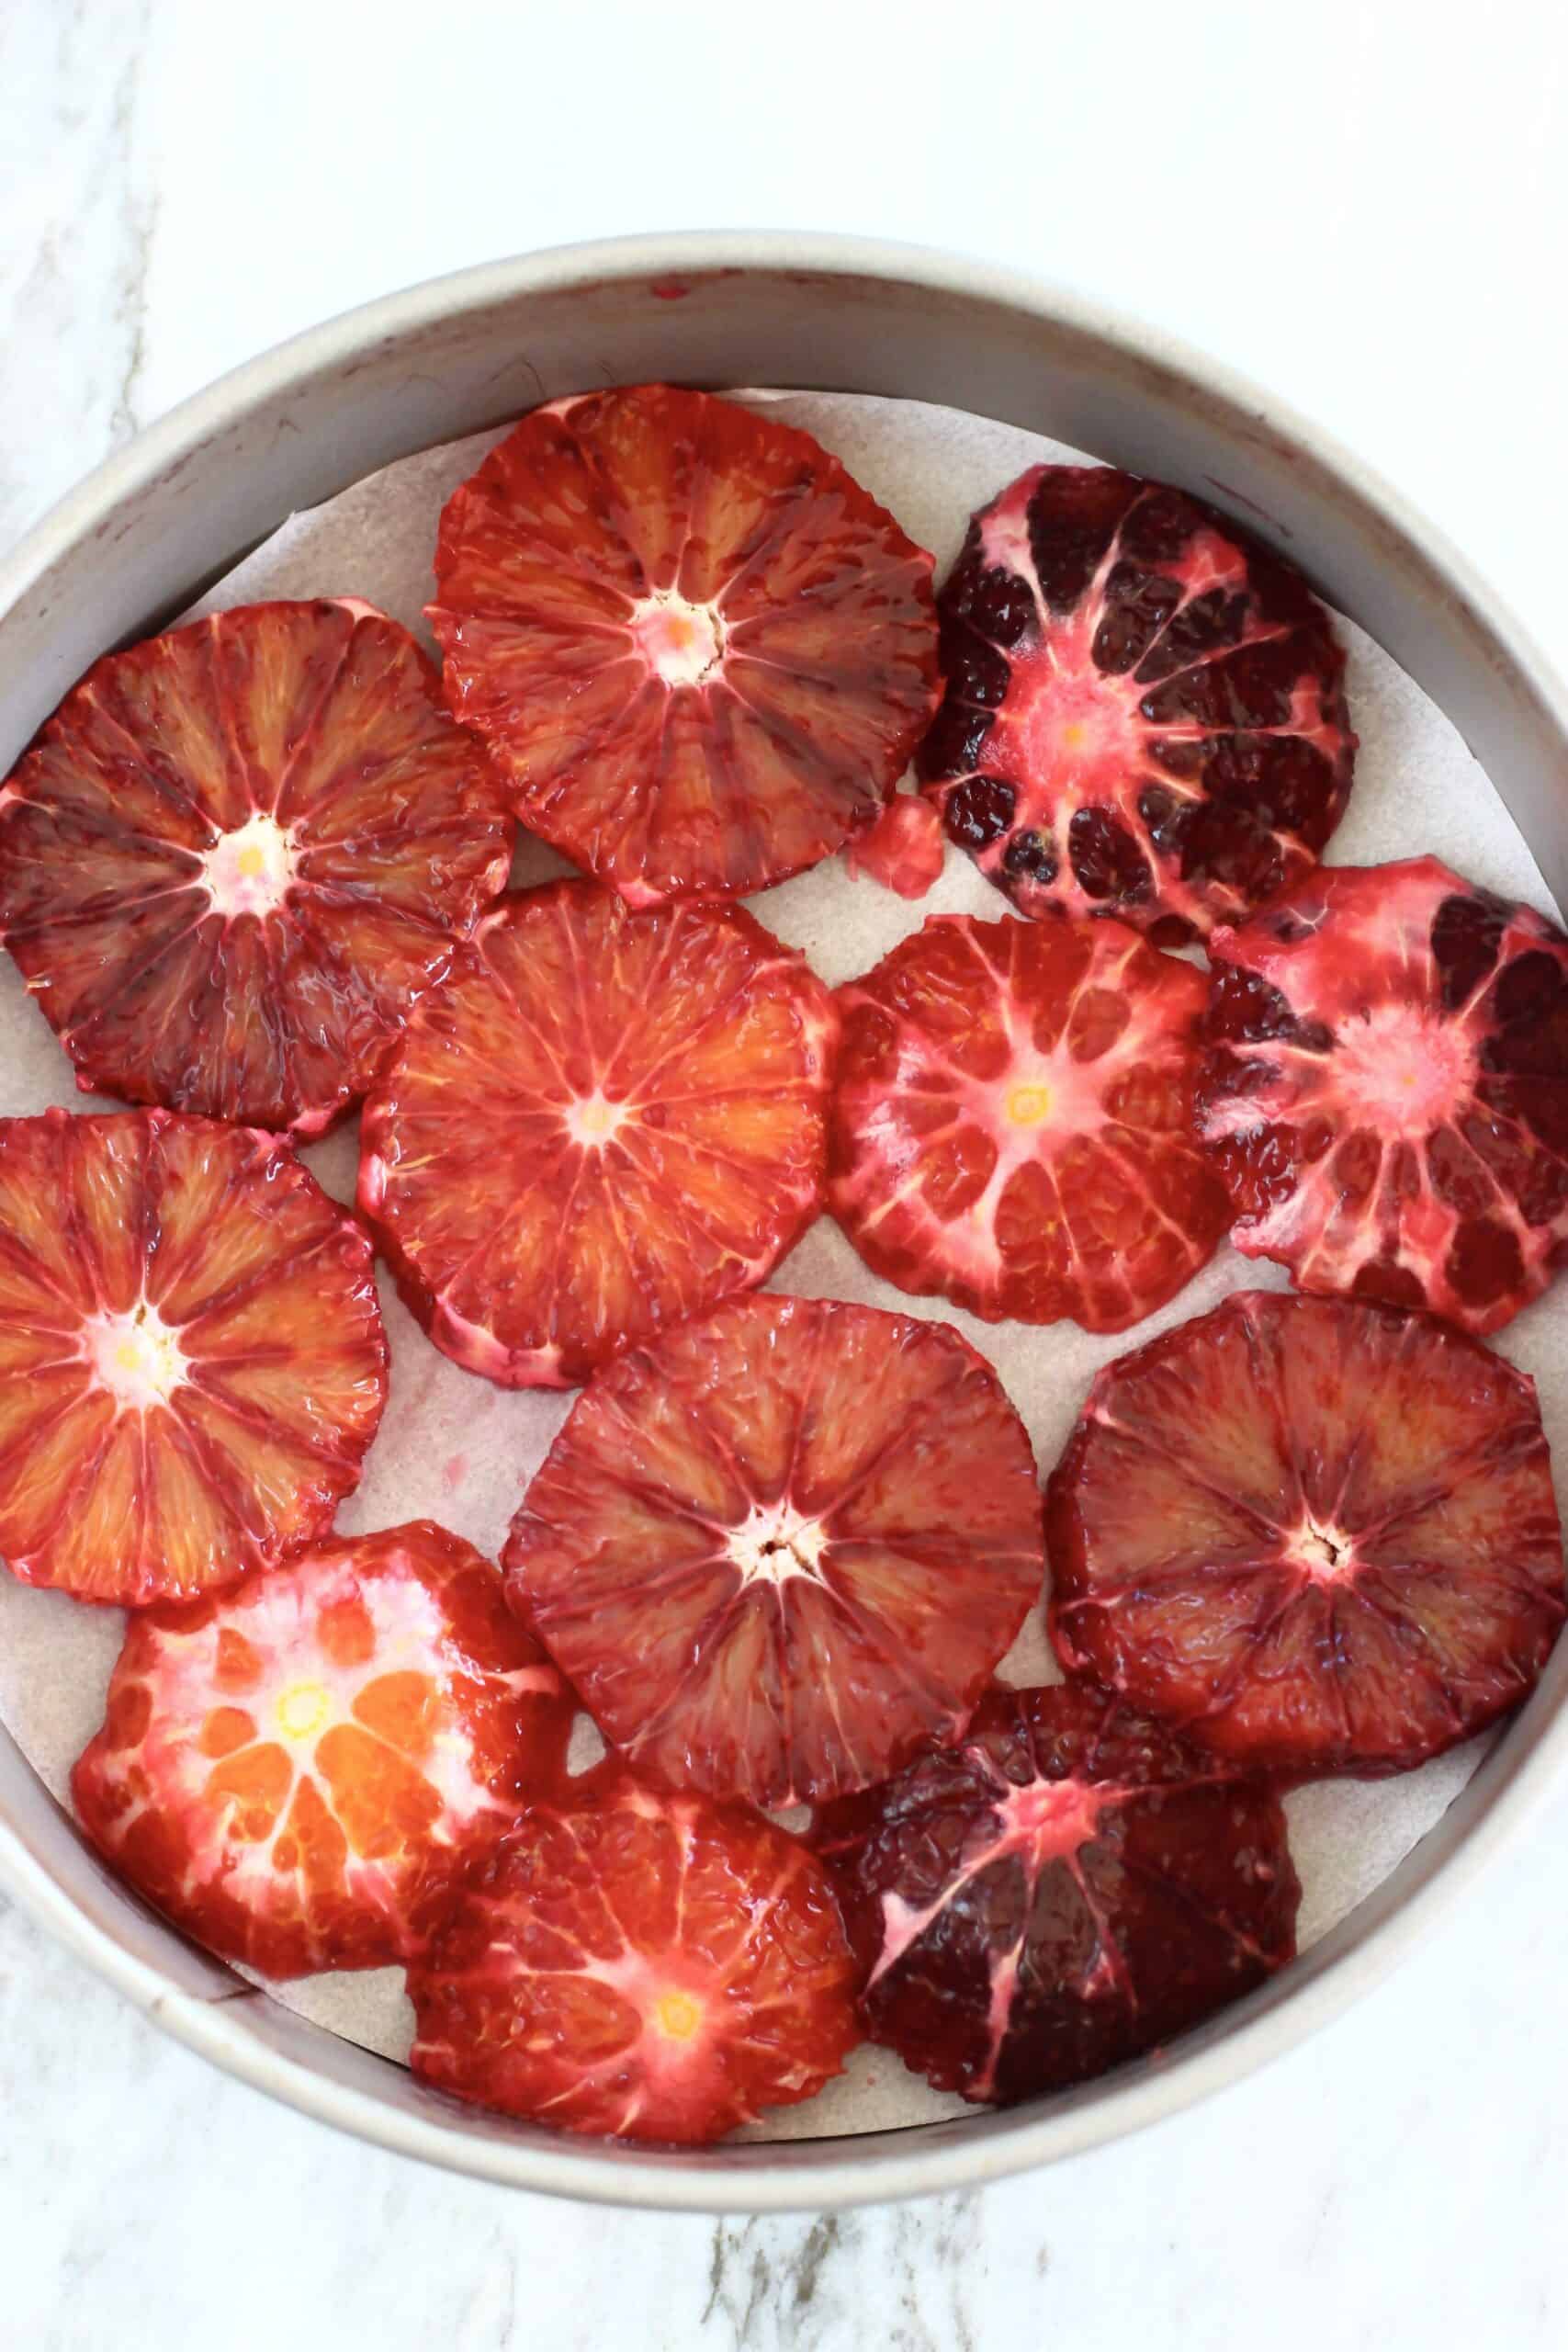 Blood orange slices laid out on the bottom of a round springform baking tin lined with baking paper